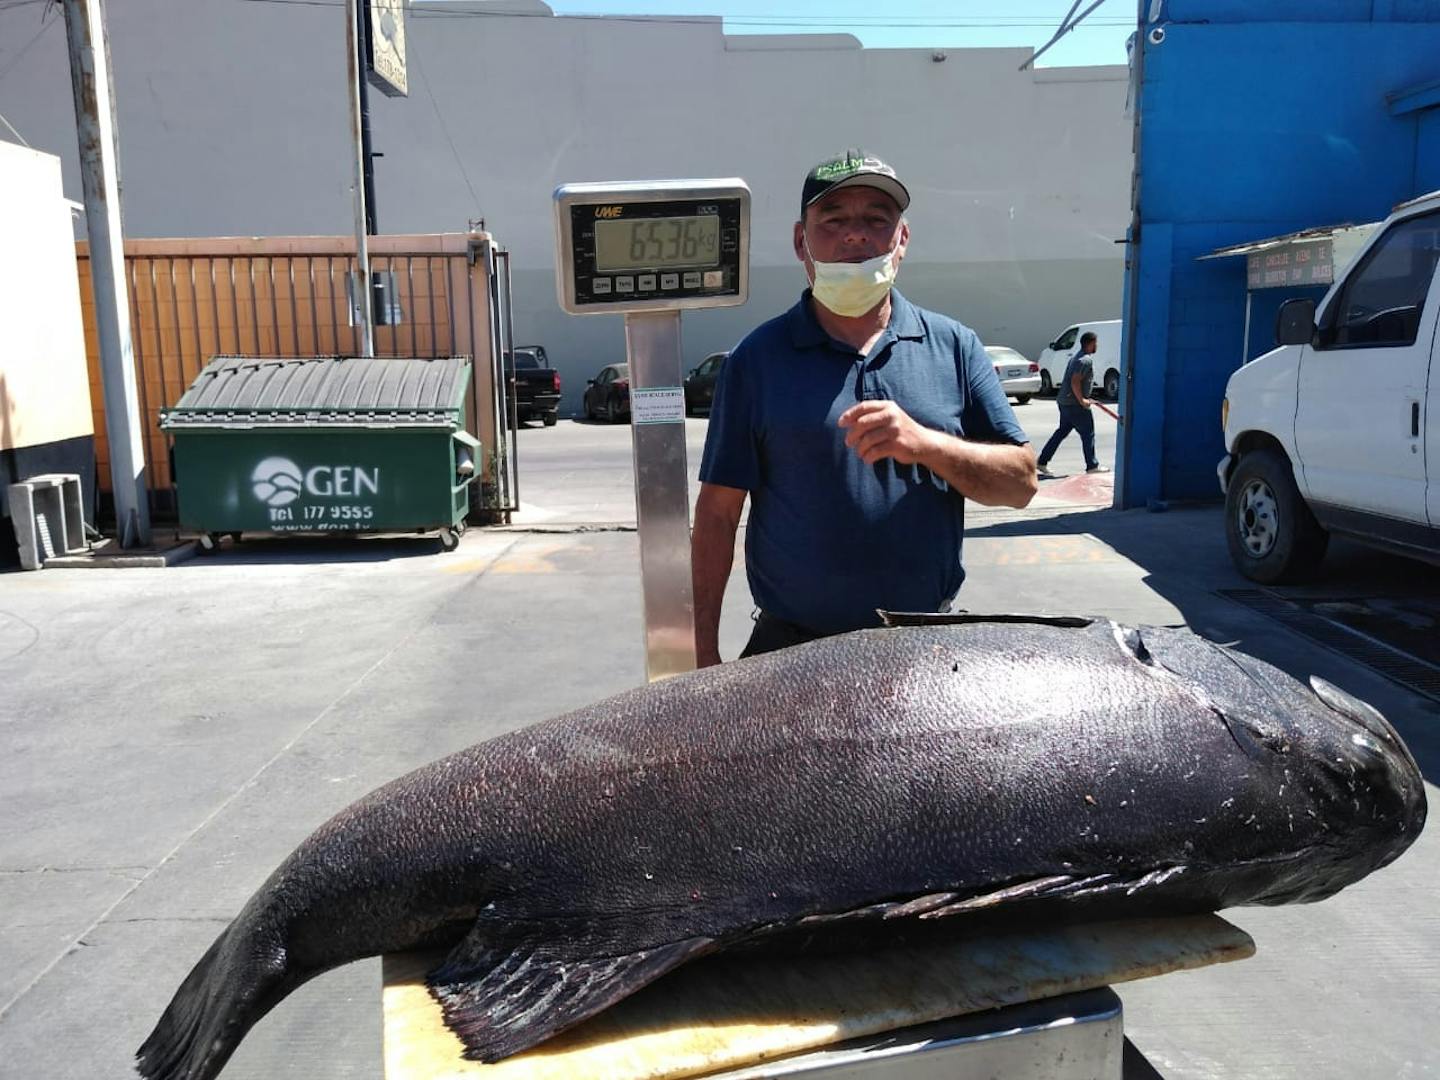 A man standing behind a very large black fish on the scales.